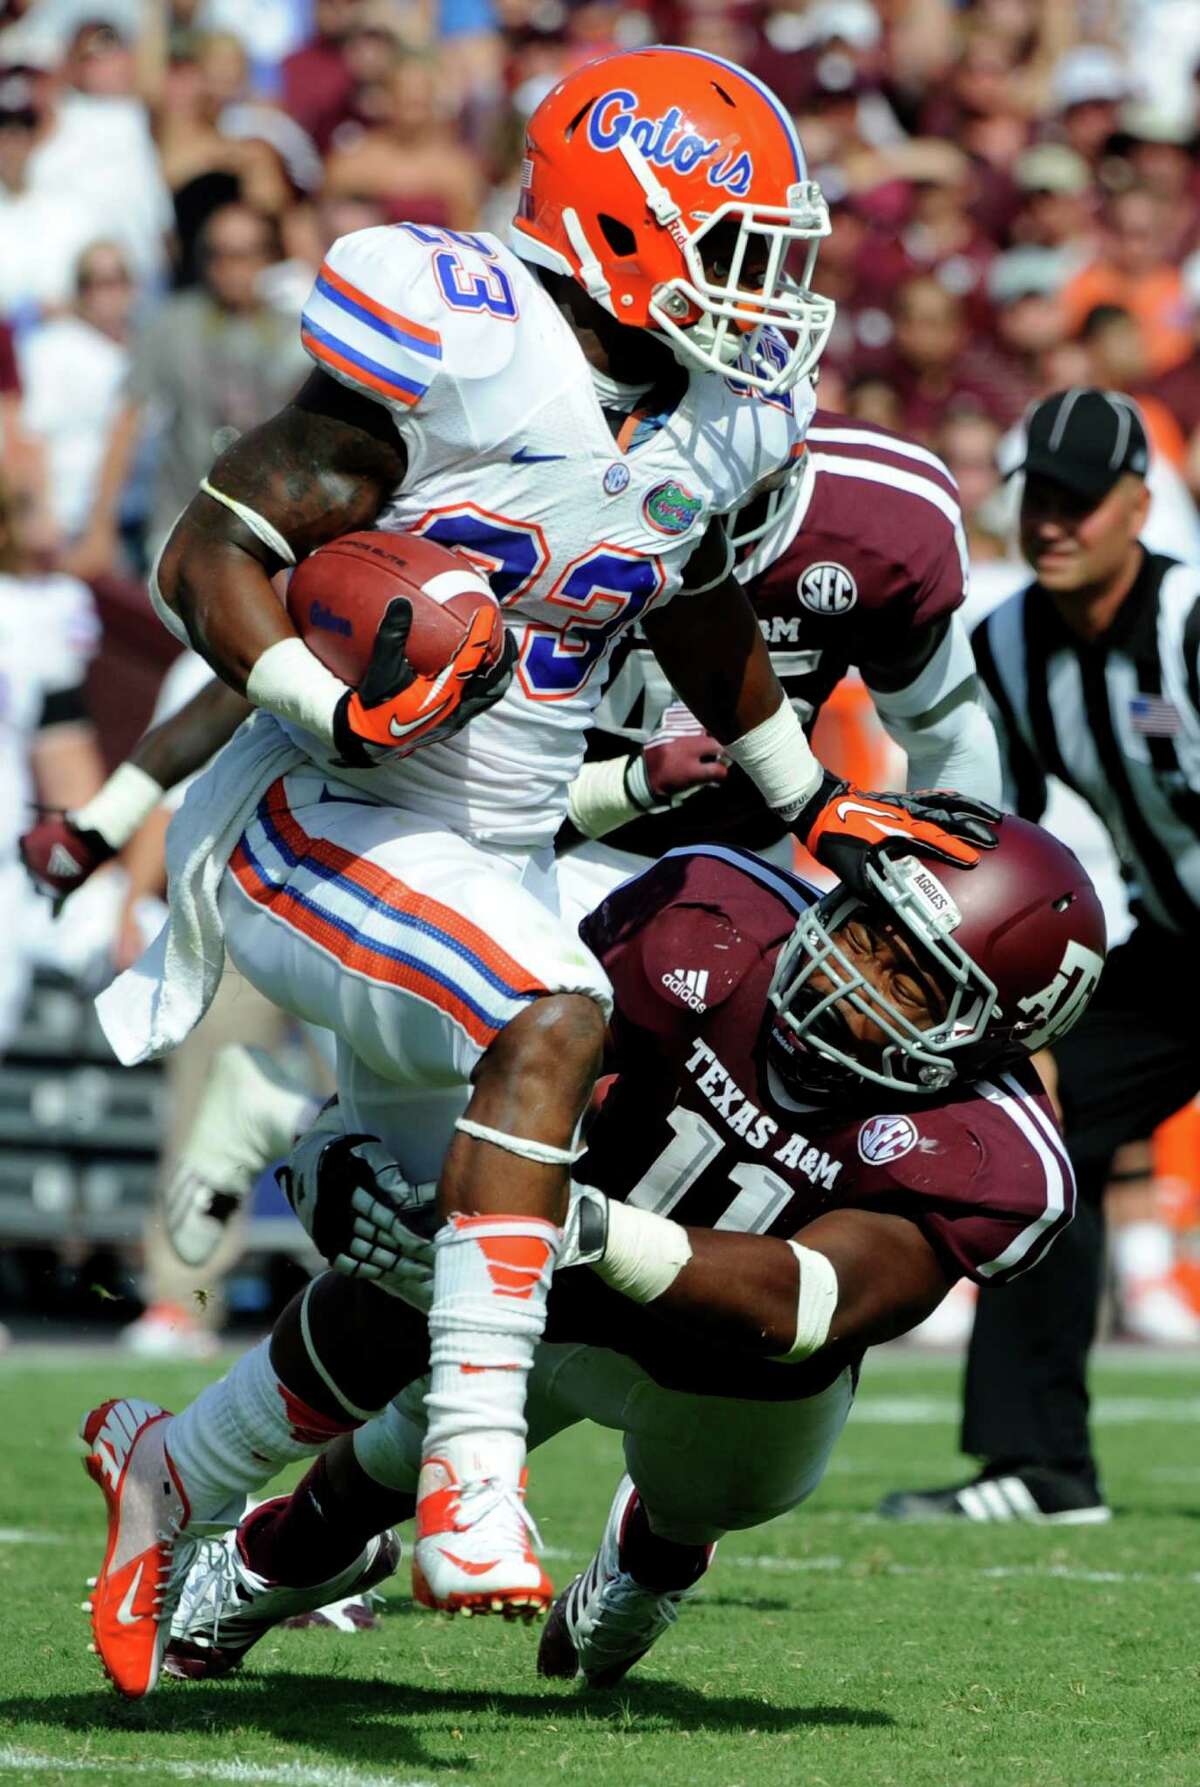 Florida running back Mike Gillislee (23) rushes for a gain as Texas A&M linebacker Jonathan Stewart (11) tries to tackle him during the third quarter of an NCAA college football game, Saturday, Sept. 8, 2012, in College Station, Texas. Florida beat Texas A&M 20-17. (AP Photo/Dave Einsel)